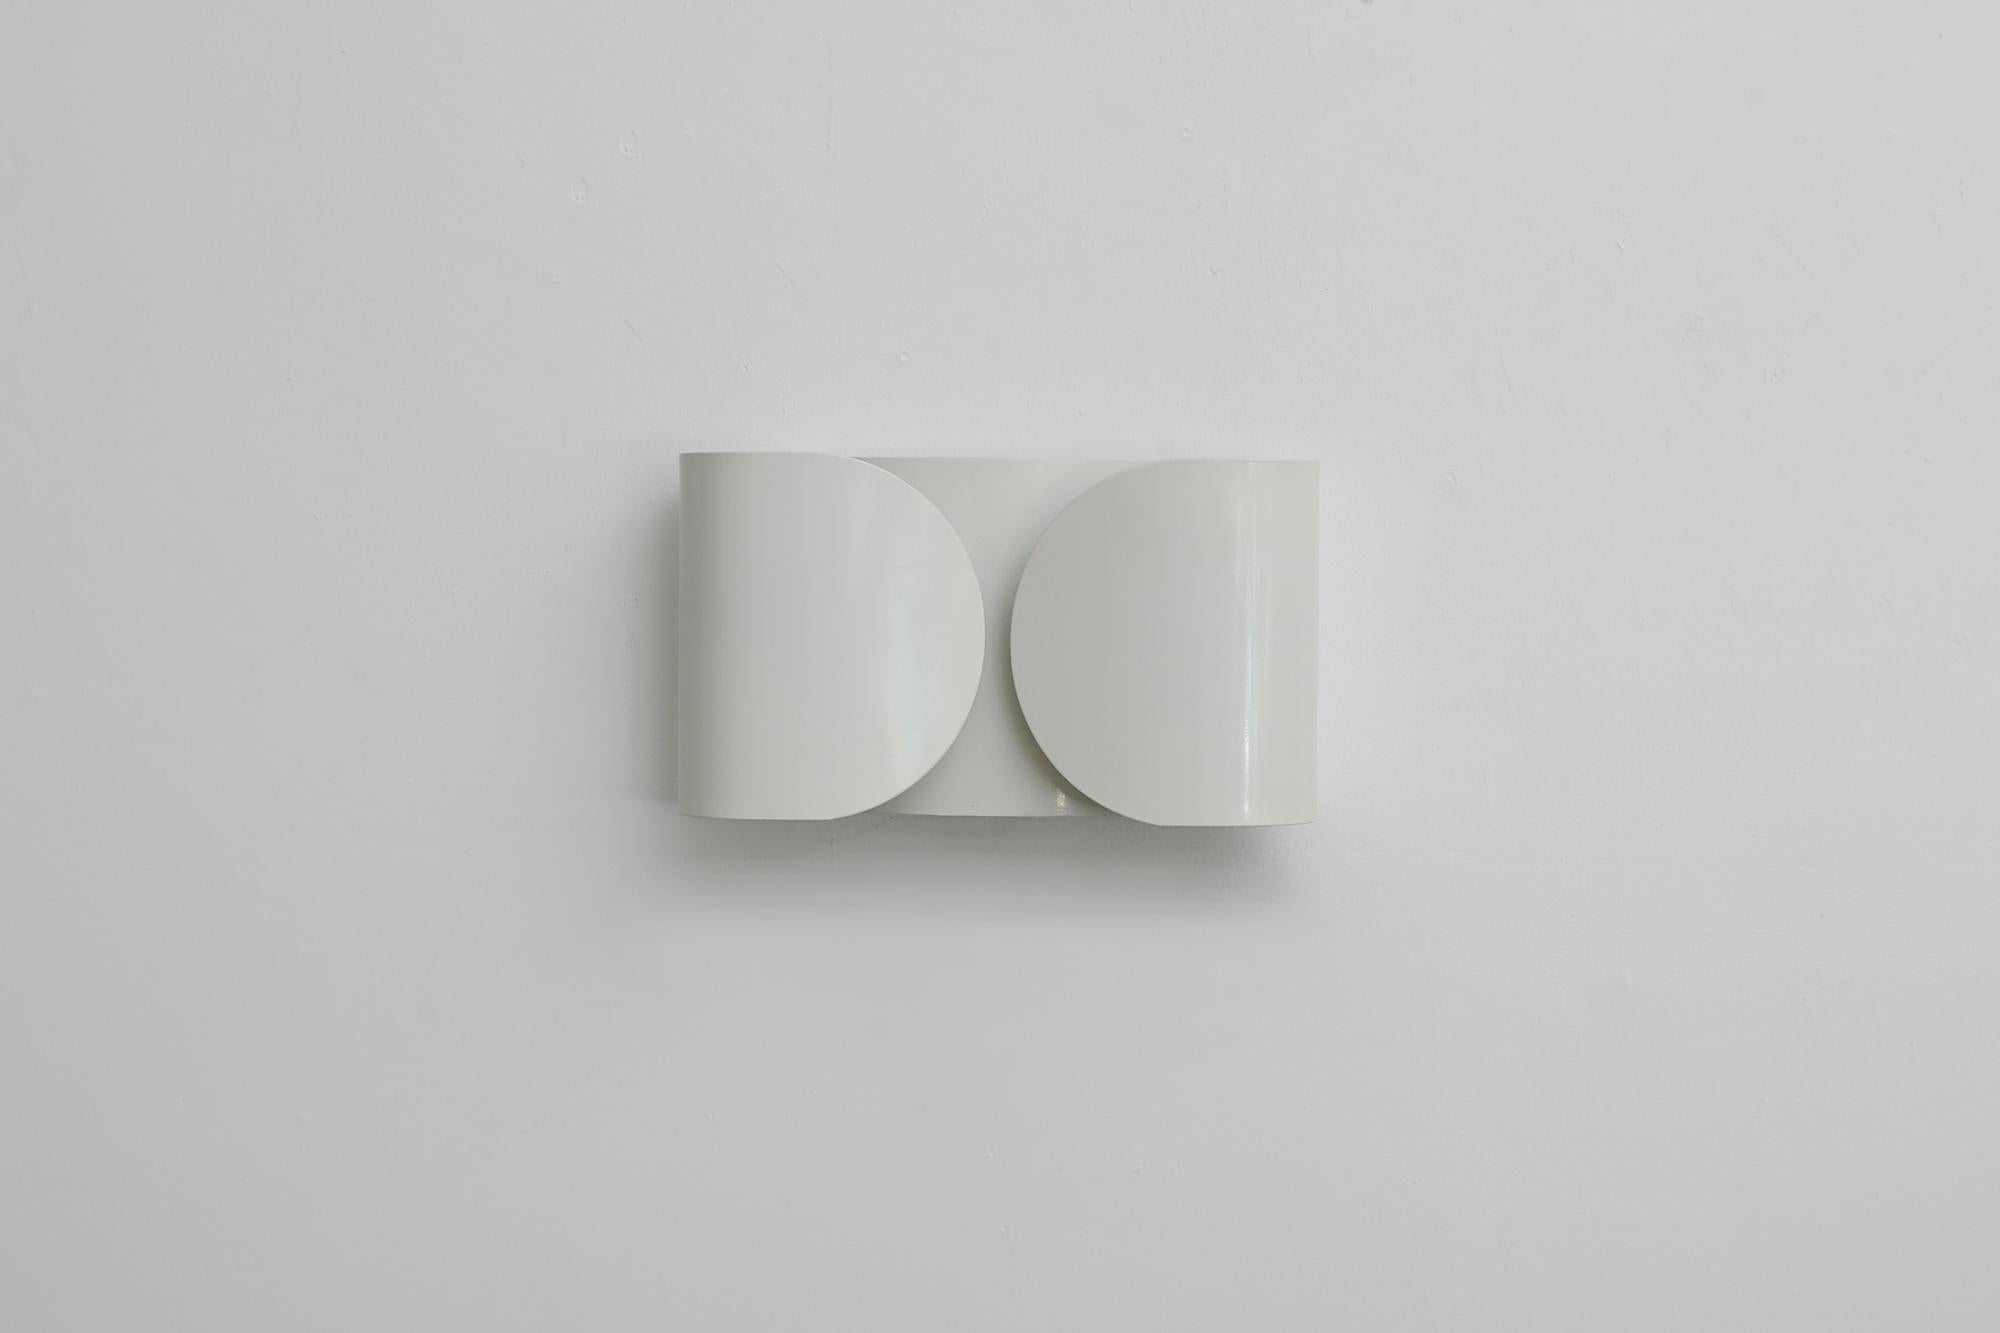 Mid-20th Century Original Mid-Century White TS-Foglio Wall Lamps by Tobia Scarpa for Flos, 1960s For Sale